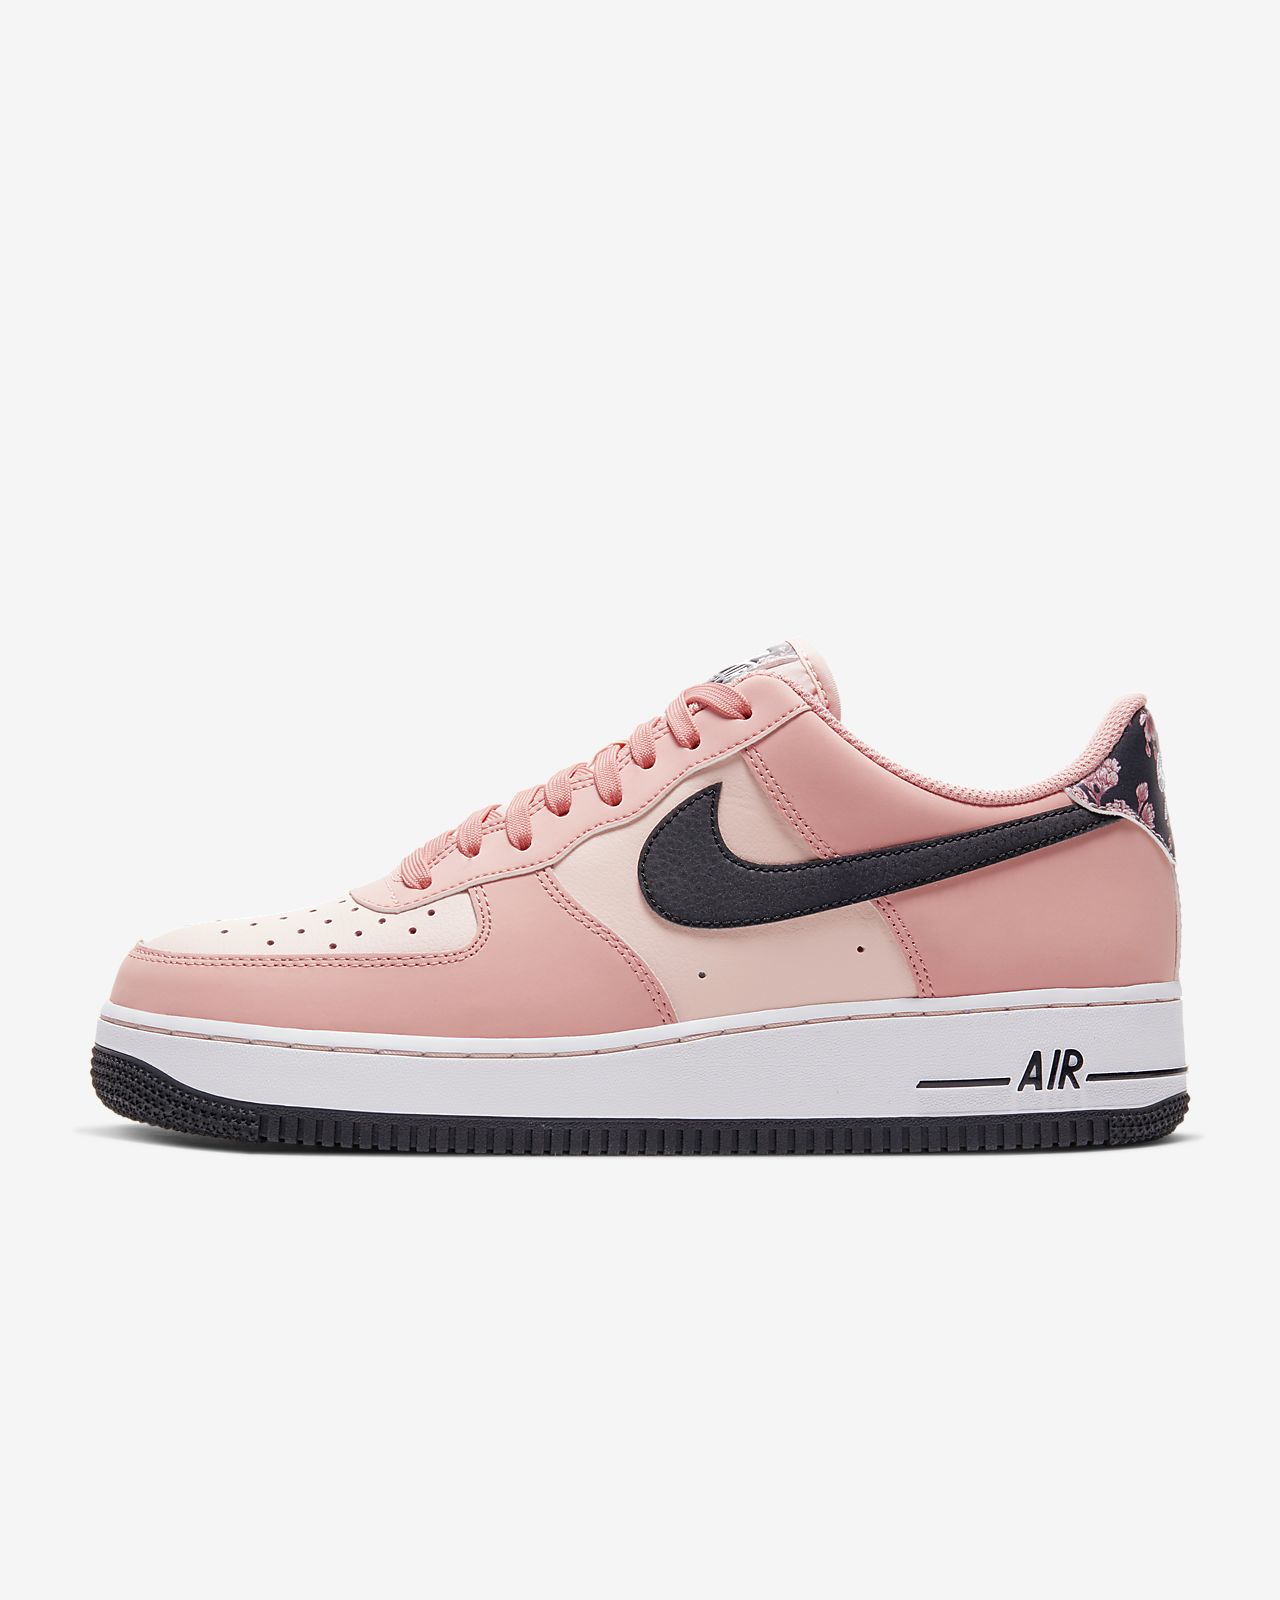 Nike Air Force 1 '07 Limited Edition Men's Shoe. Nike.com